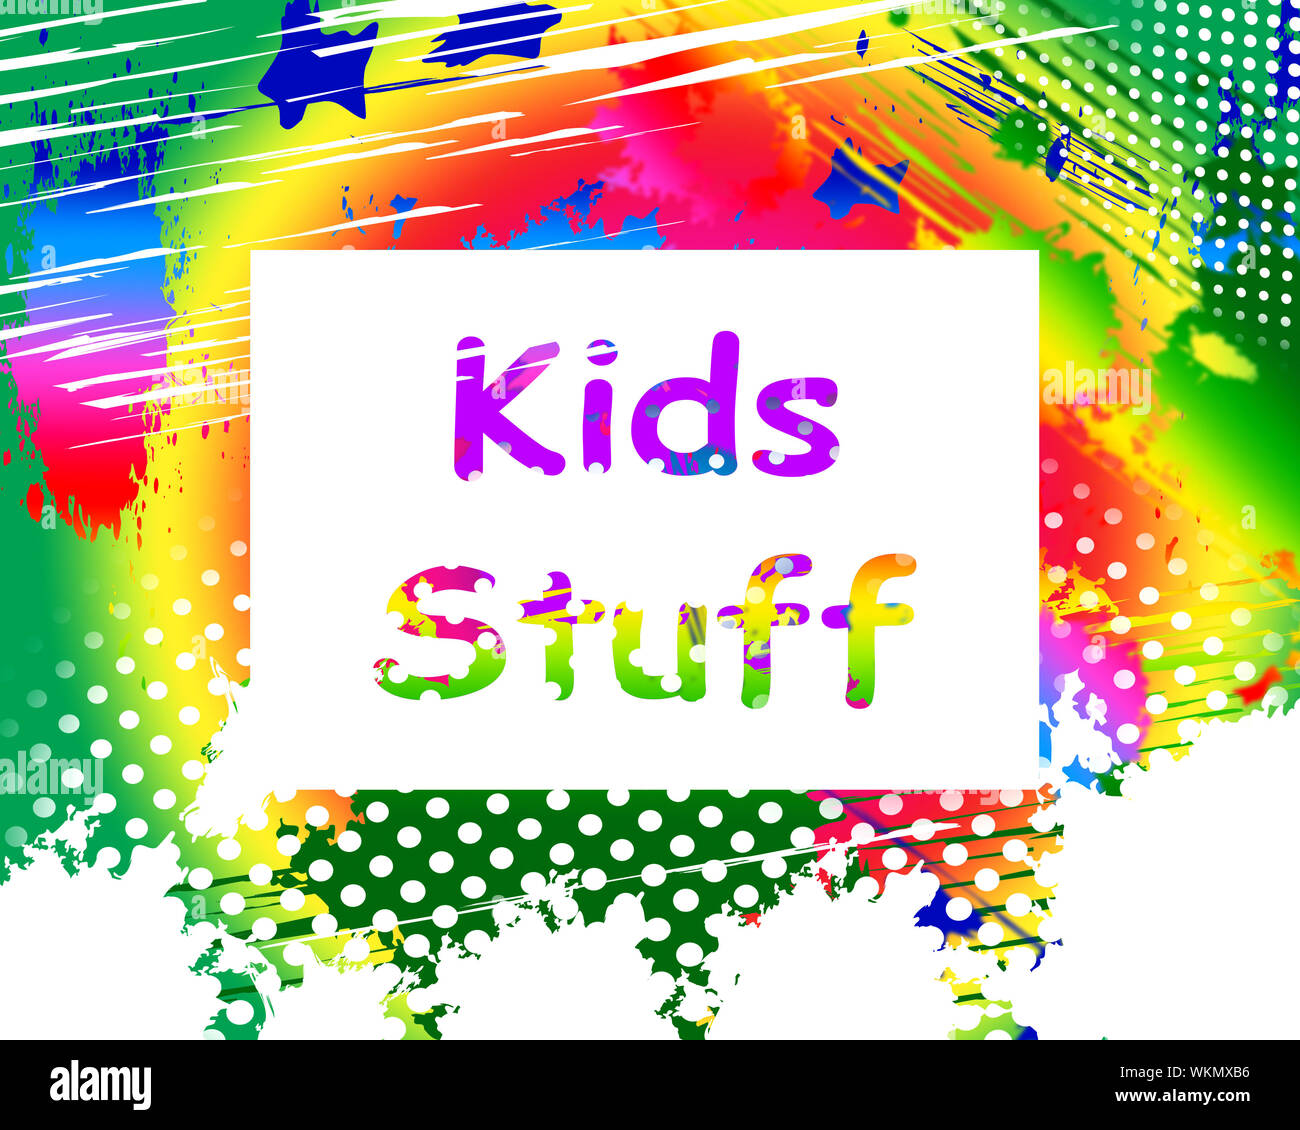 Kids Stuff On Sign Meaning Online Activities For Children Stock Photo,  Picture and Royalty Free Image. Image 31411384.